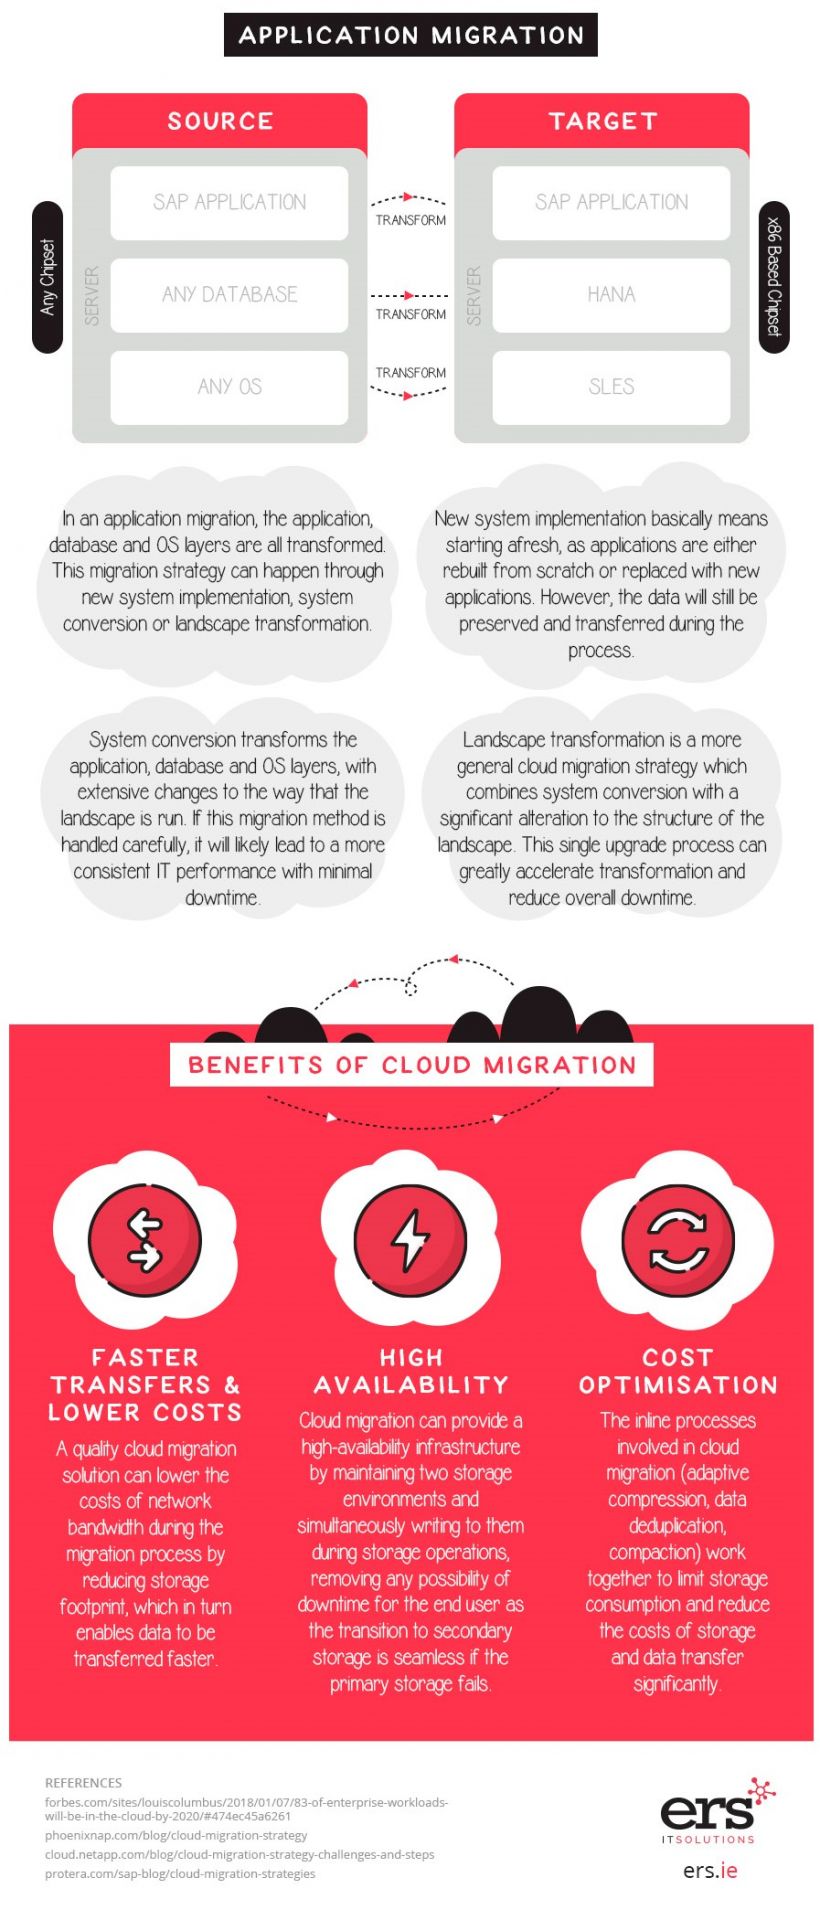 However, when it comes to starting a cloud migration, organizations have a hard time deciding what is best for them, what’s the difference between multiple cloud strategies, and what is the most effective one. Fortunately, ERS IT SOLUTIONS answered all these questions in the infographic below.